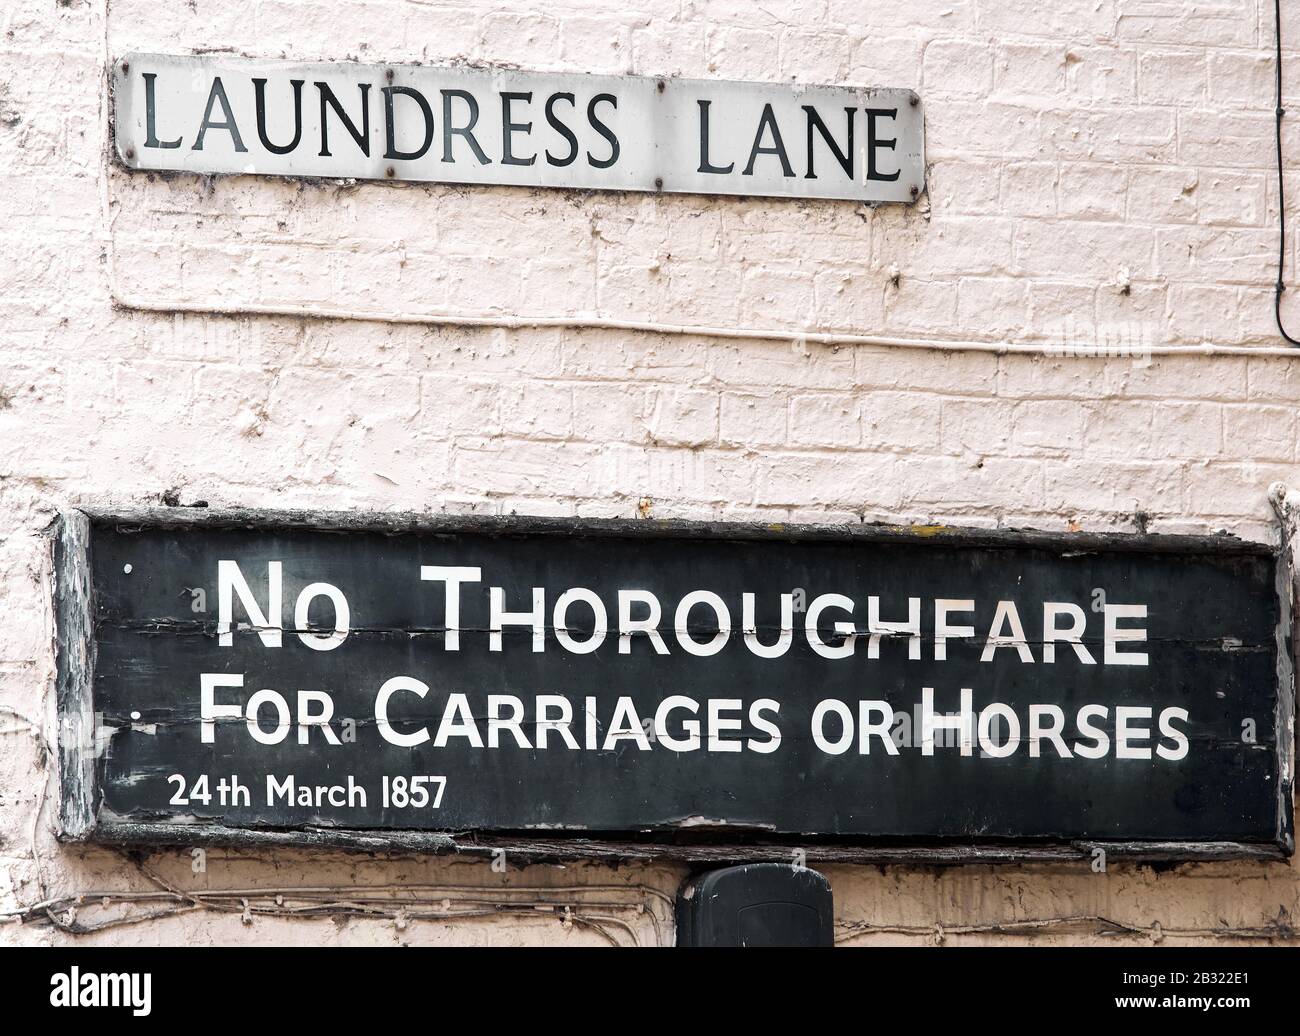 Road sign, 1857, in Laundress Lane, Cambridge, England, informing travellers that there is no thoroughfare for carriages or horses. Stock Photo